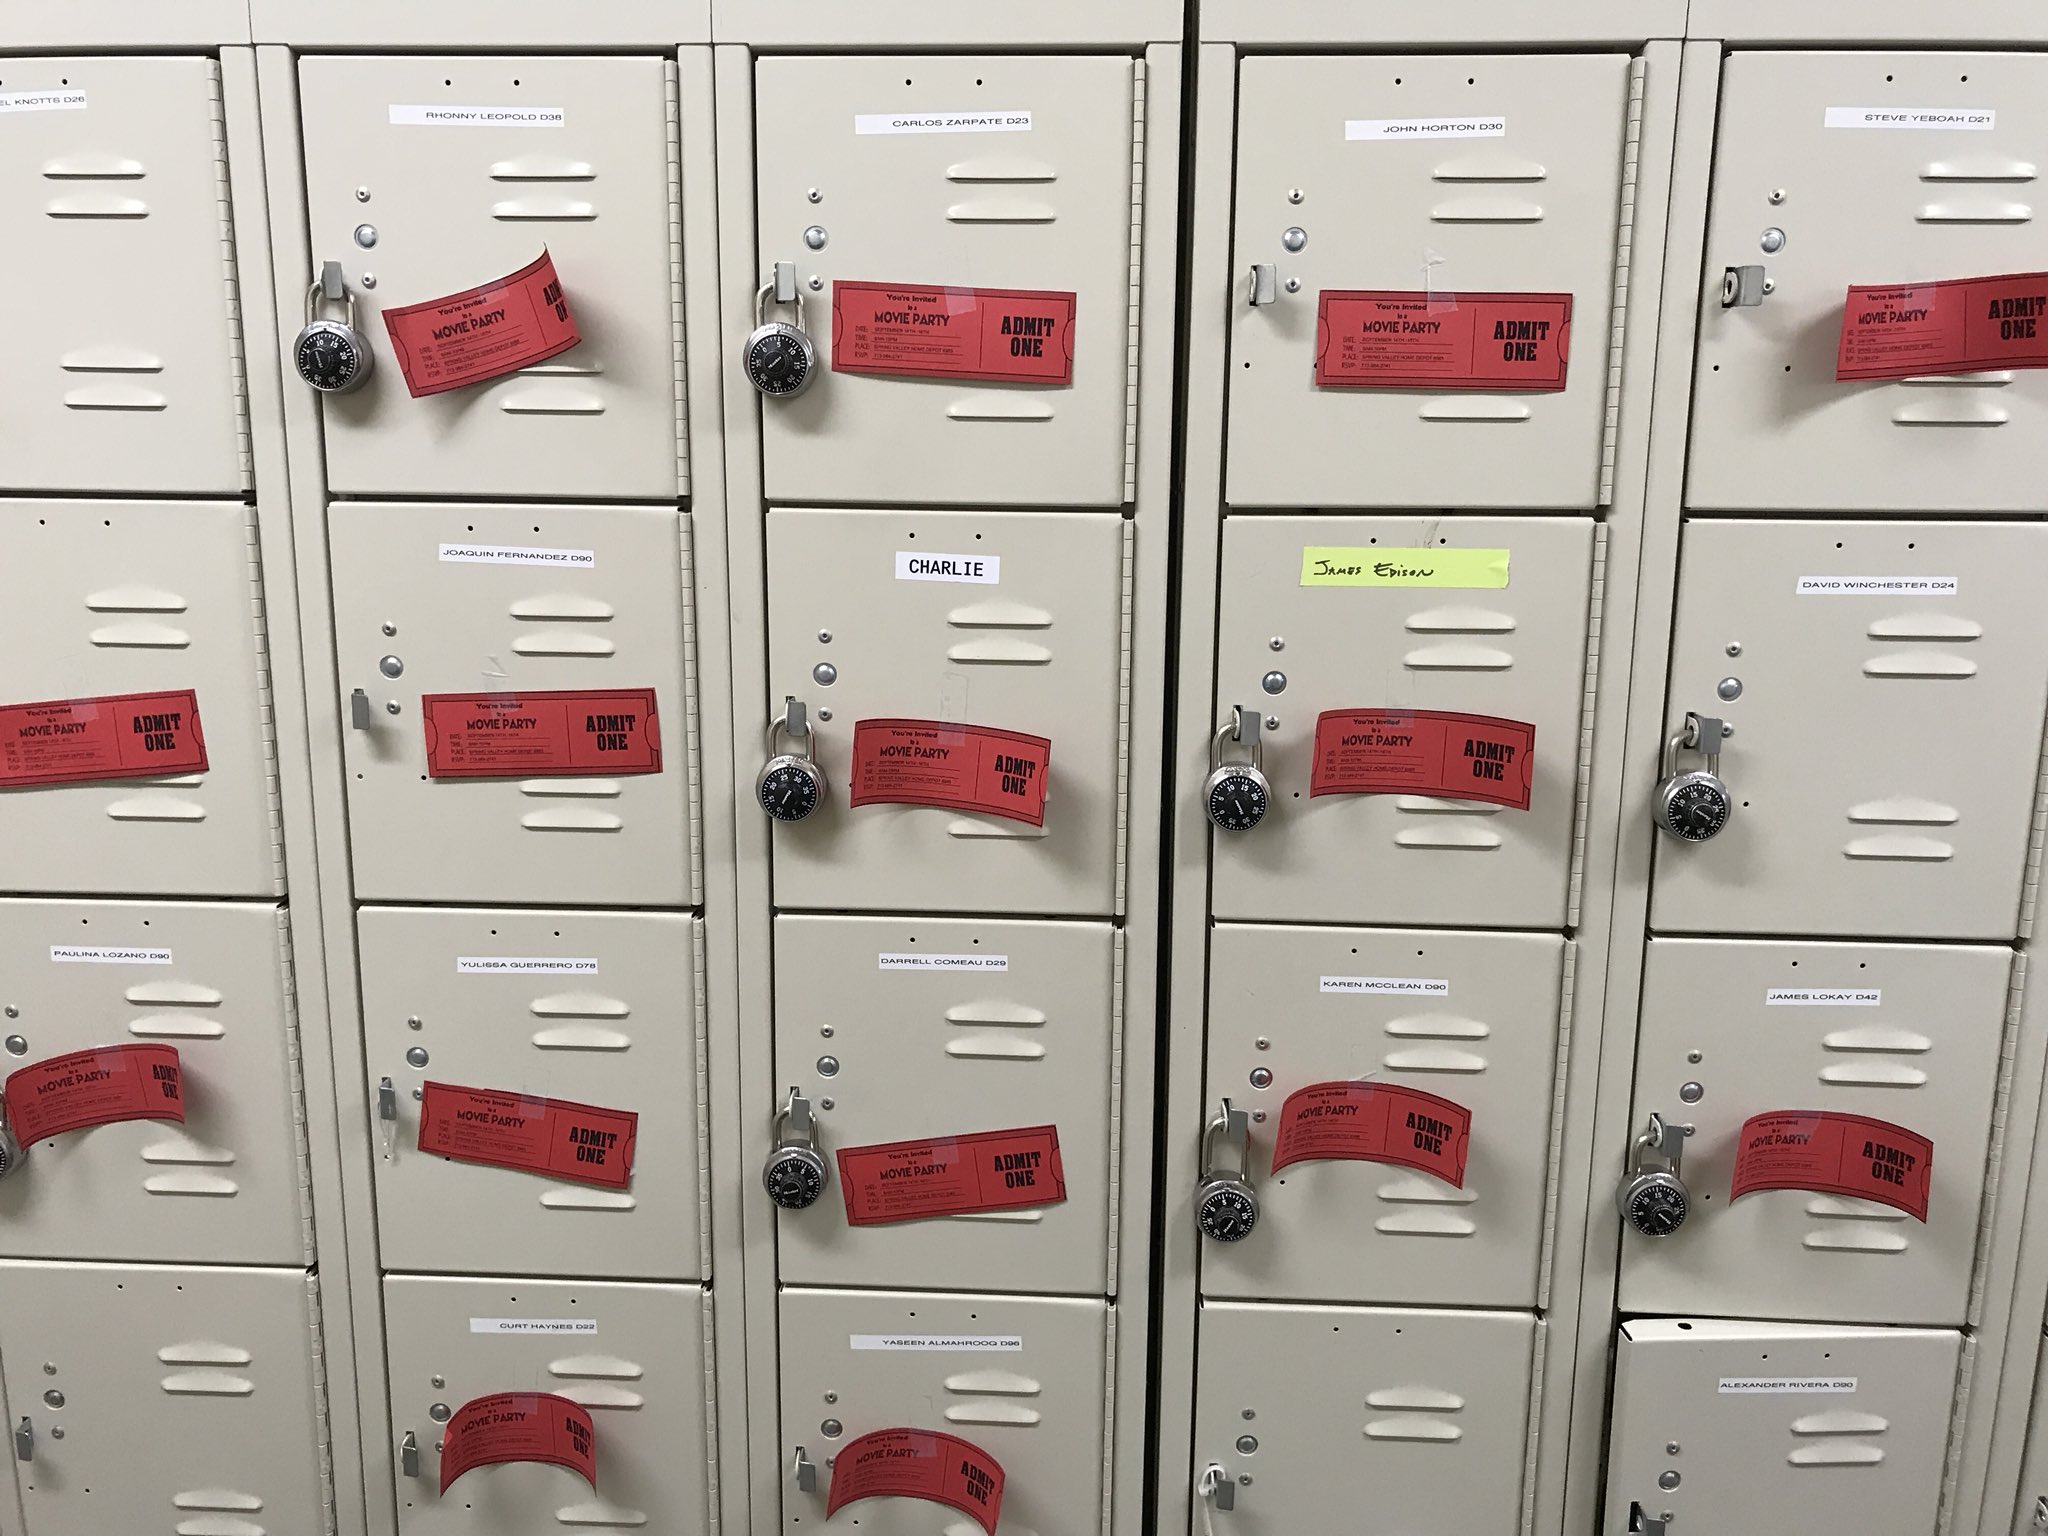 CHECKMATE LOCKERS - Family Shared Lockers